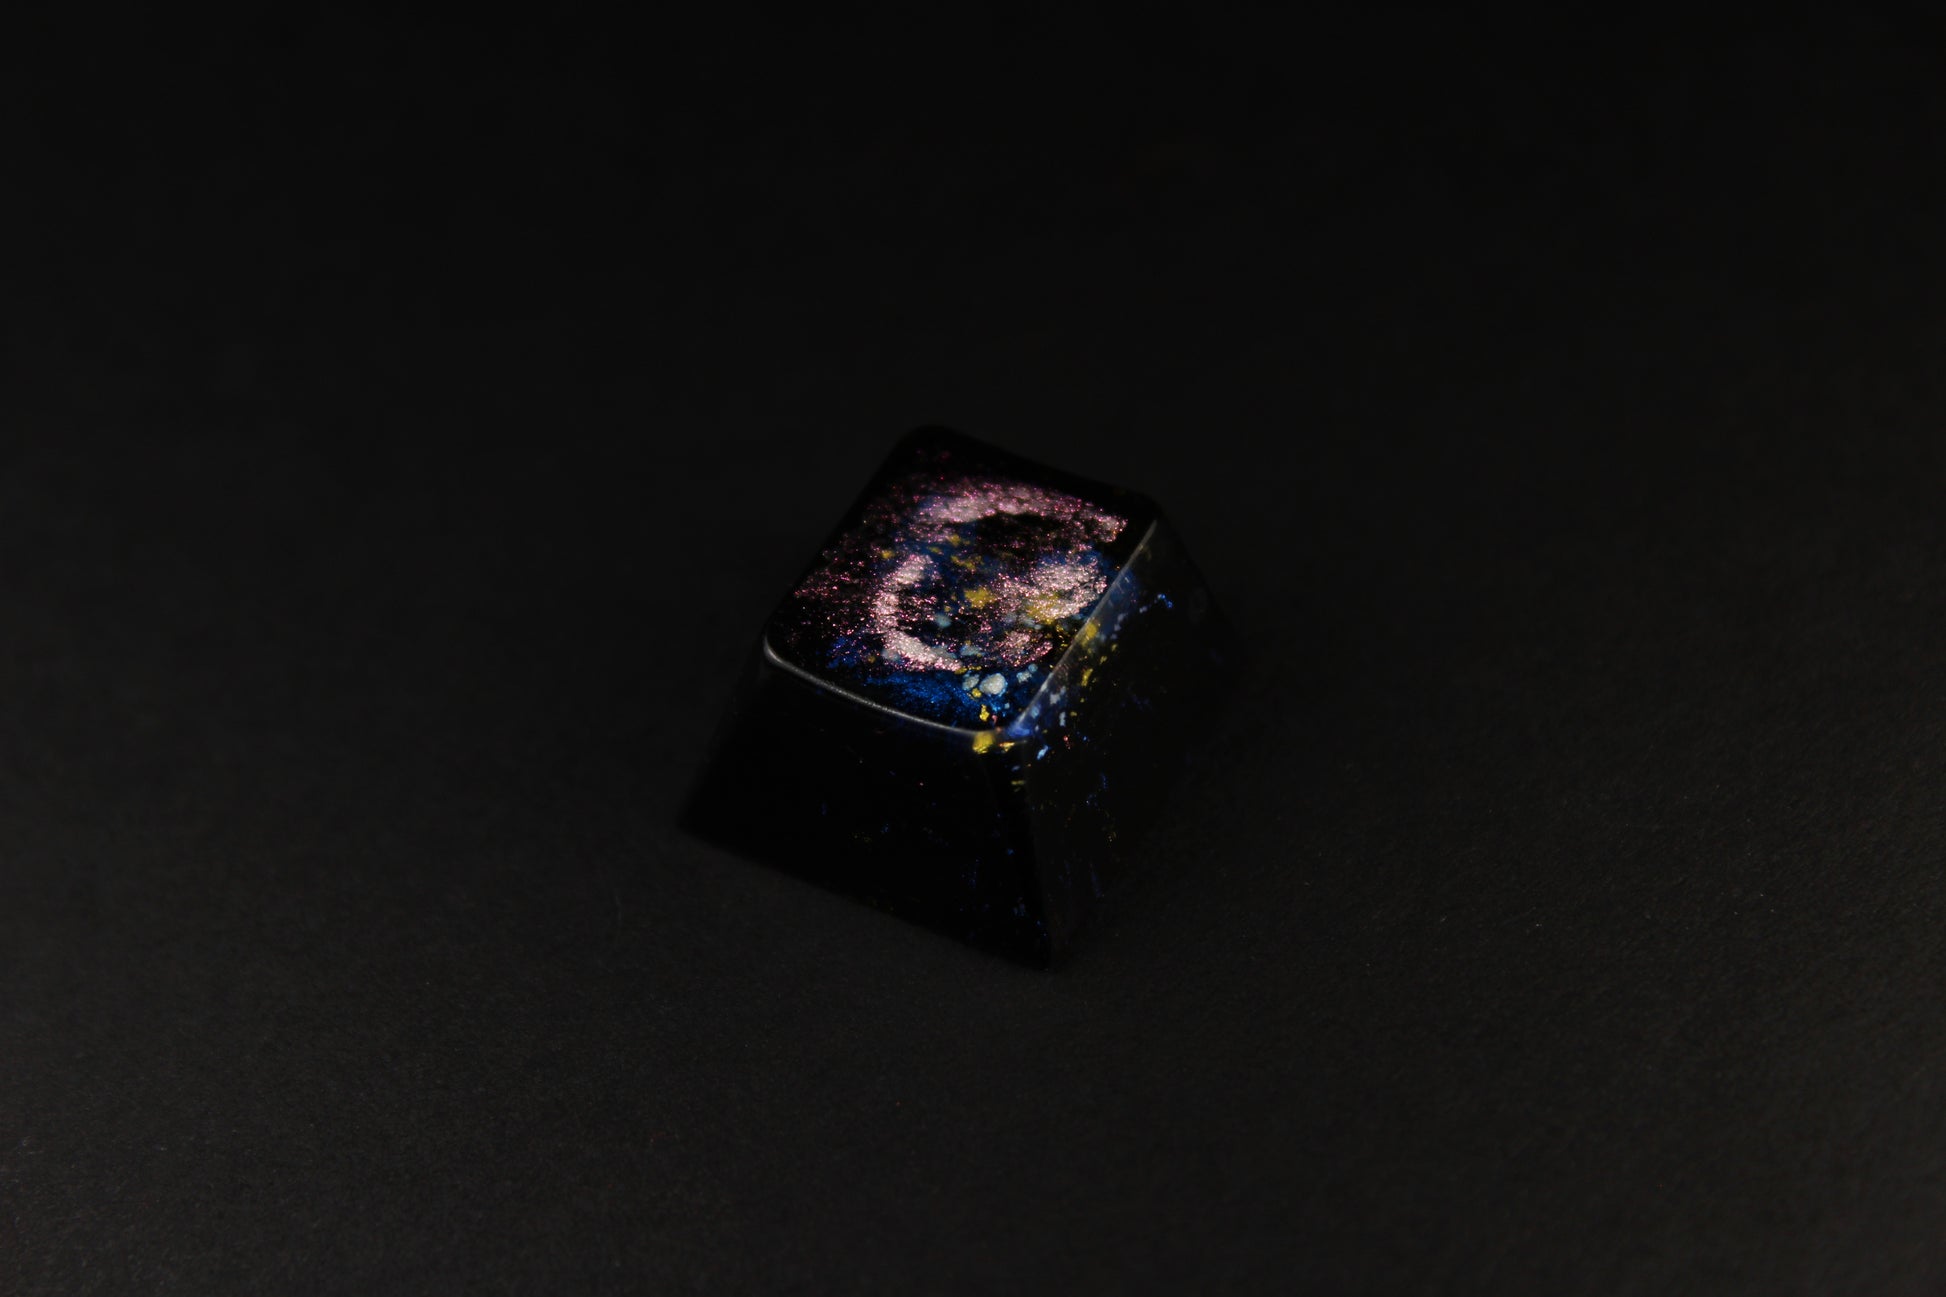 Cherry Esc - Deep Field - Endeavour - PrimeCaps Keycap - Blank and Sculpted Artisan Keycaps for cherry MX mechanical keyboards 